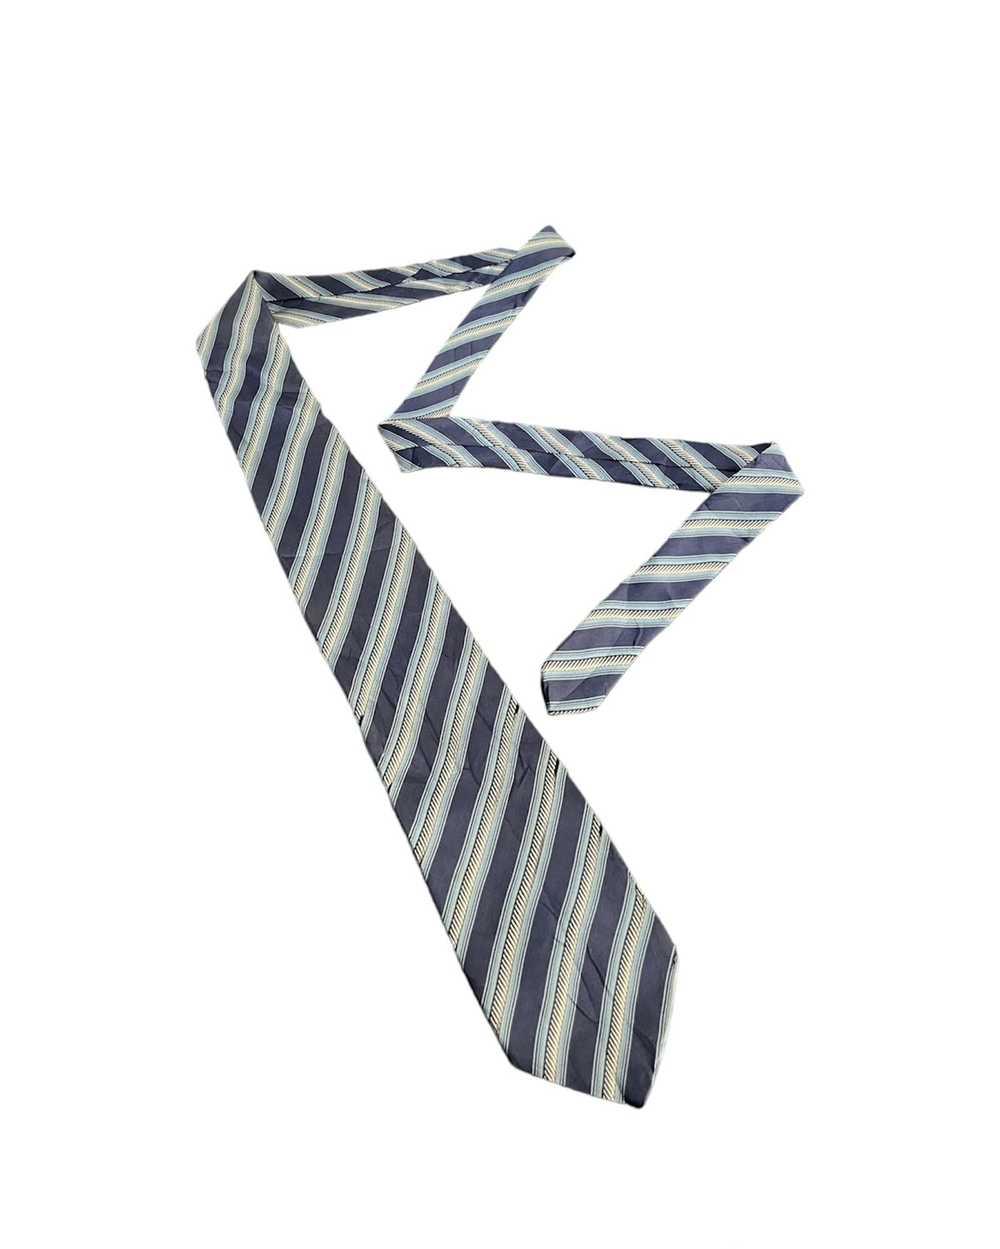 Person's Persons Tie - image 1